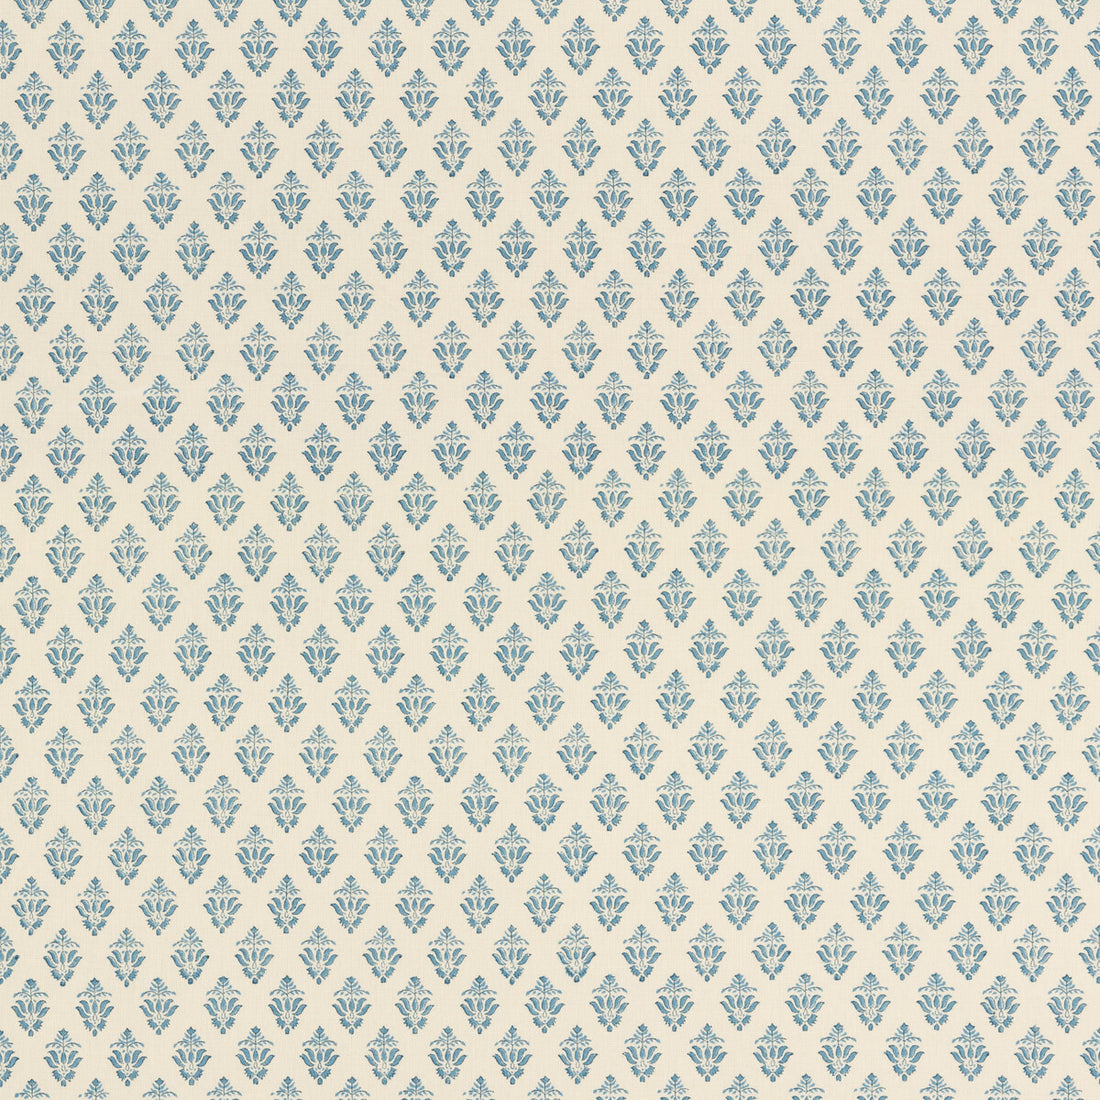 Thornham fabric in indigo color - pattern BP10793.2.0 - by G P &amp; J Baker in the Artisan II collection